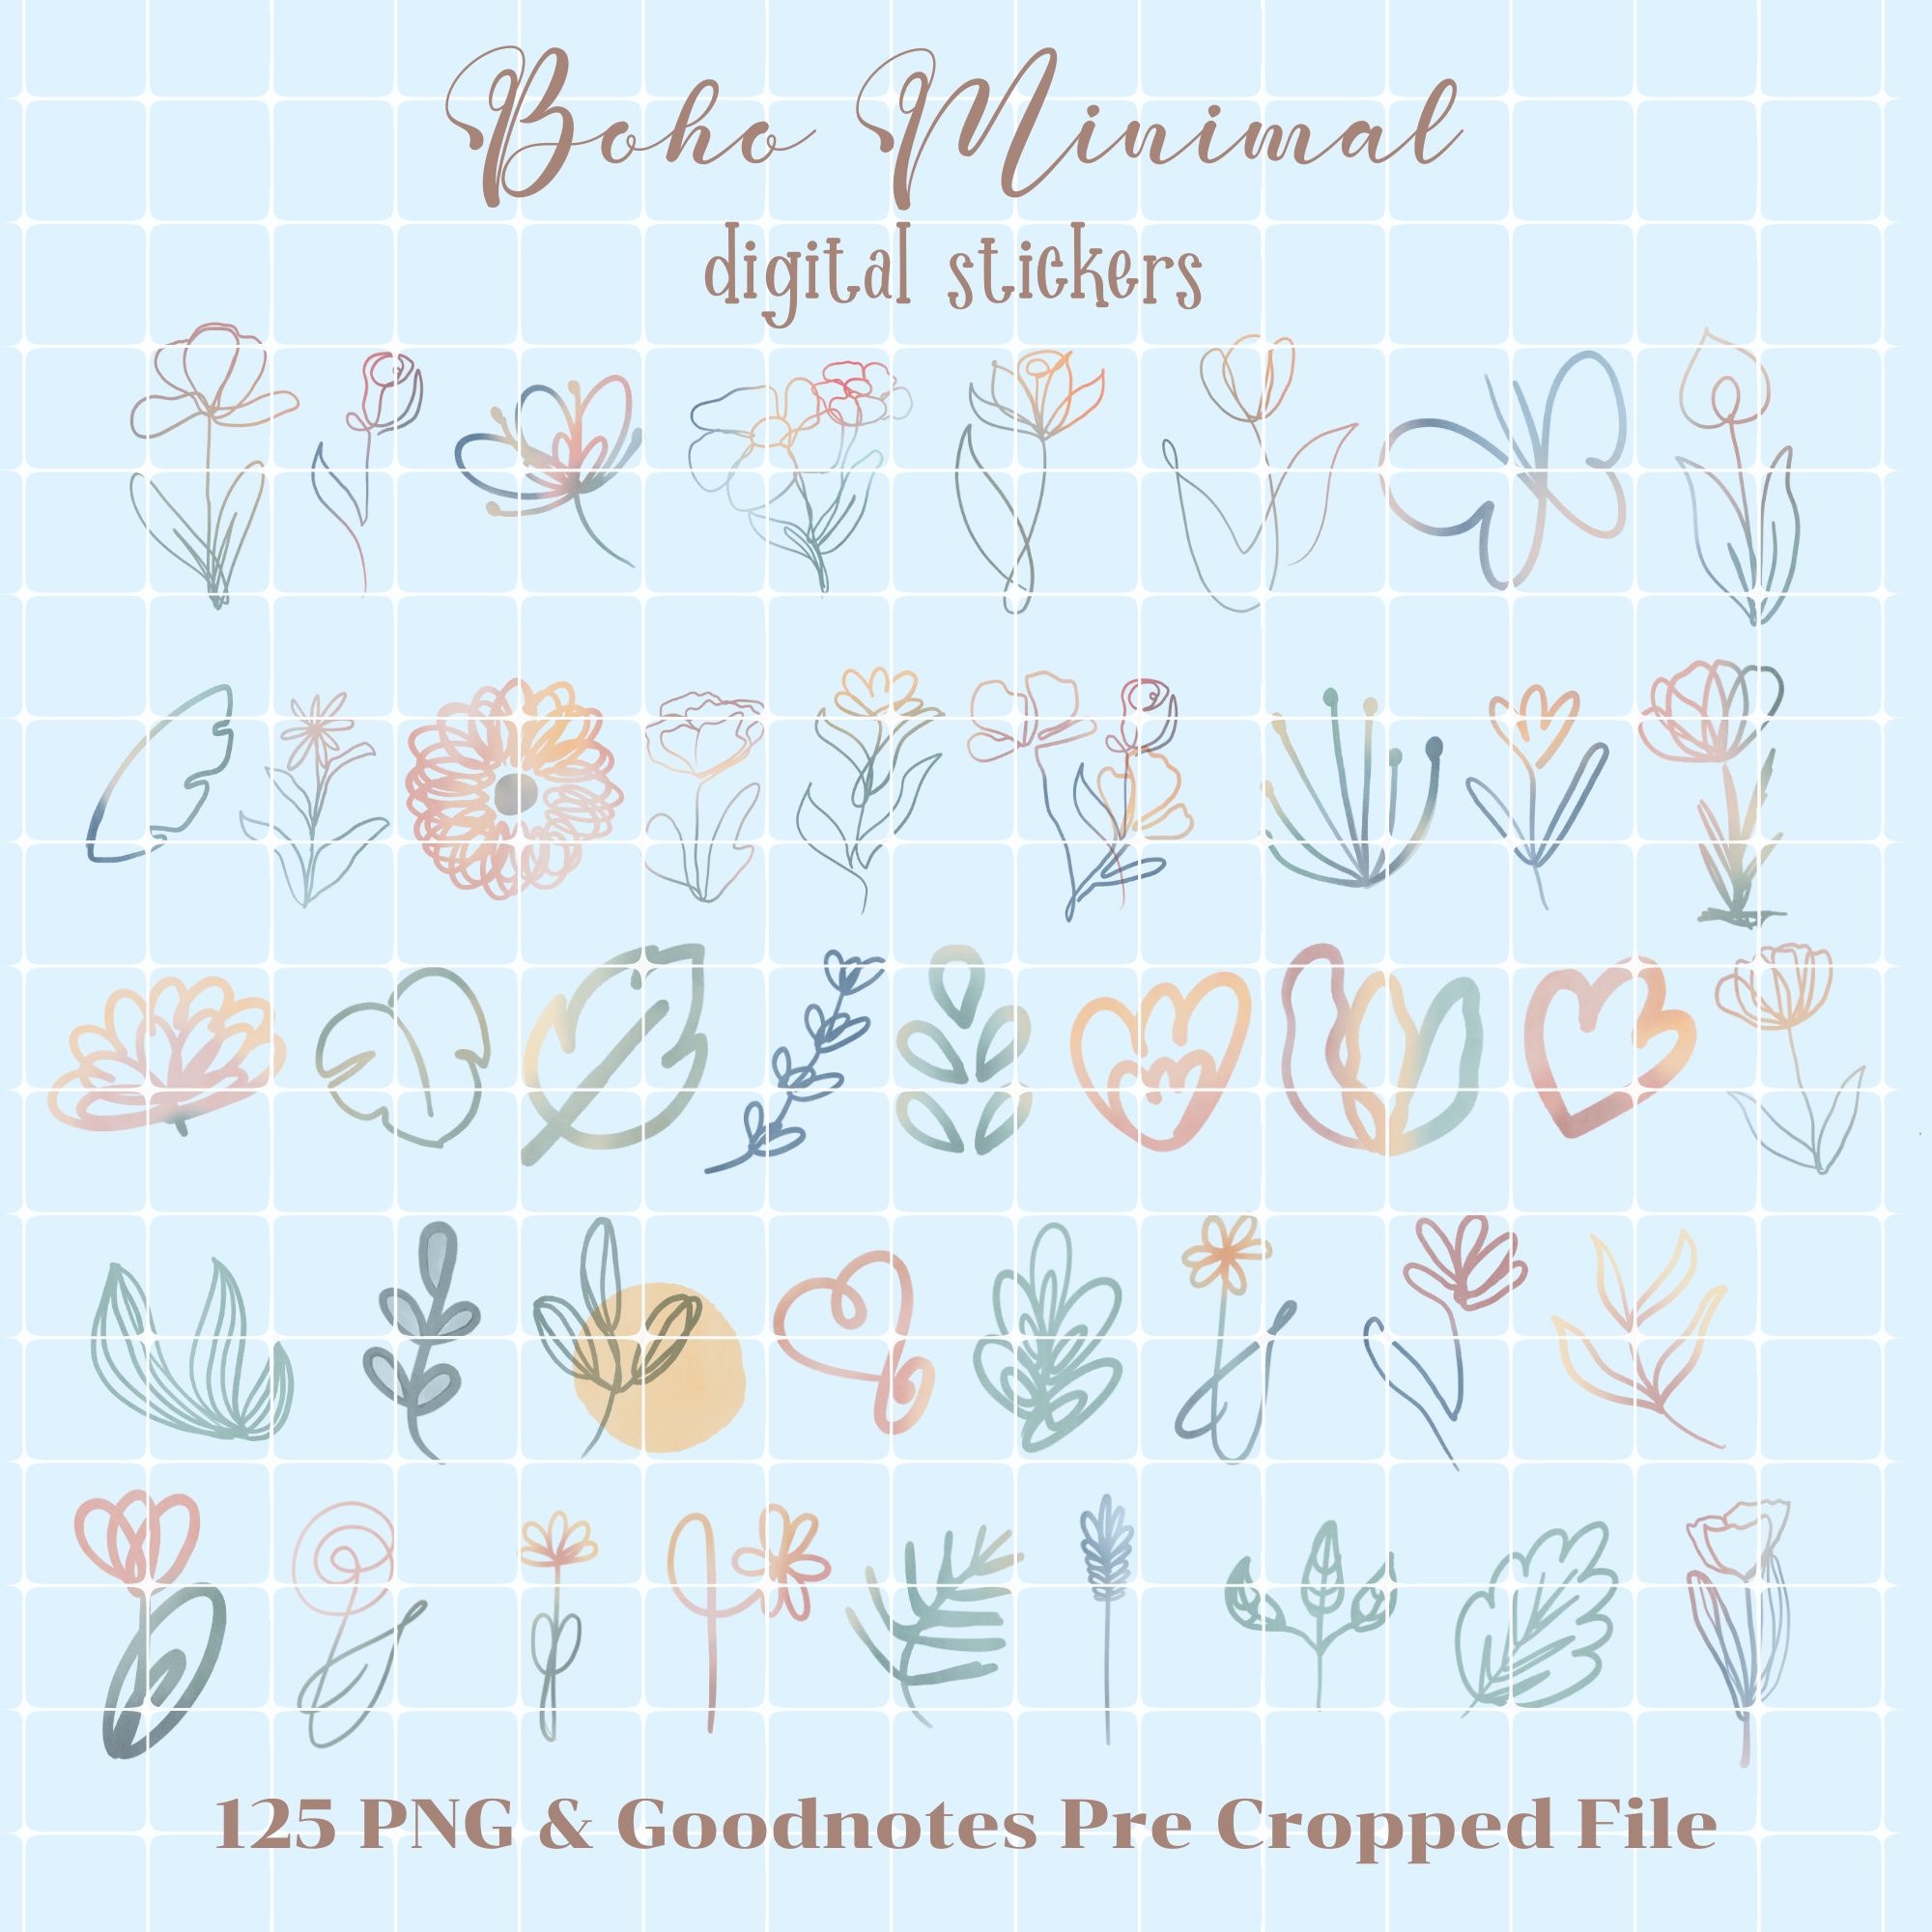 125 Boho Minimal Digital Stickers PNG & Goodnotes Pre Cropped File cover image.